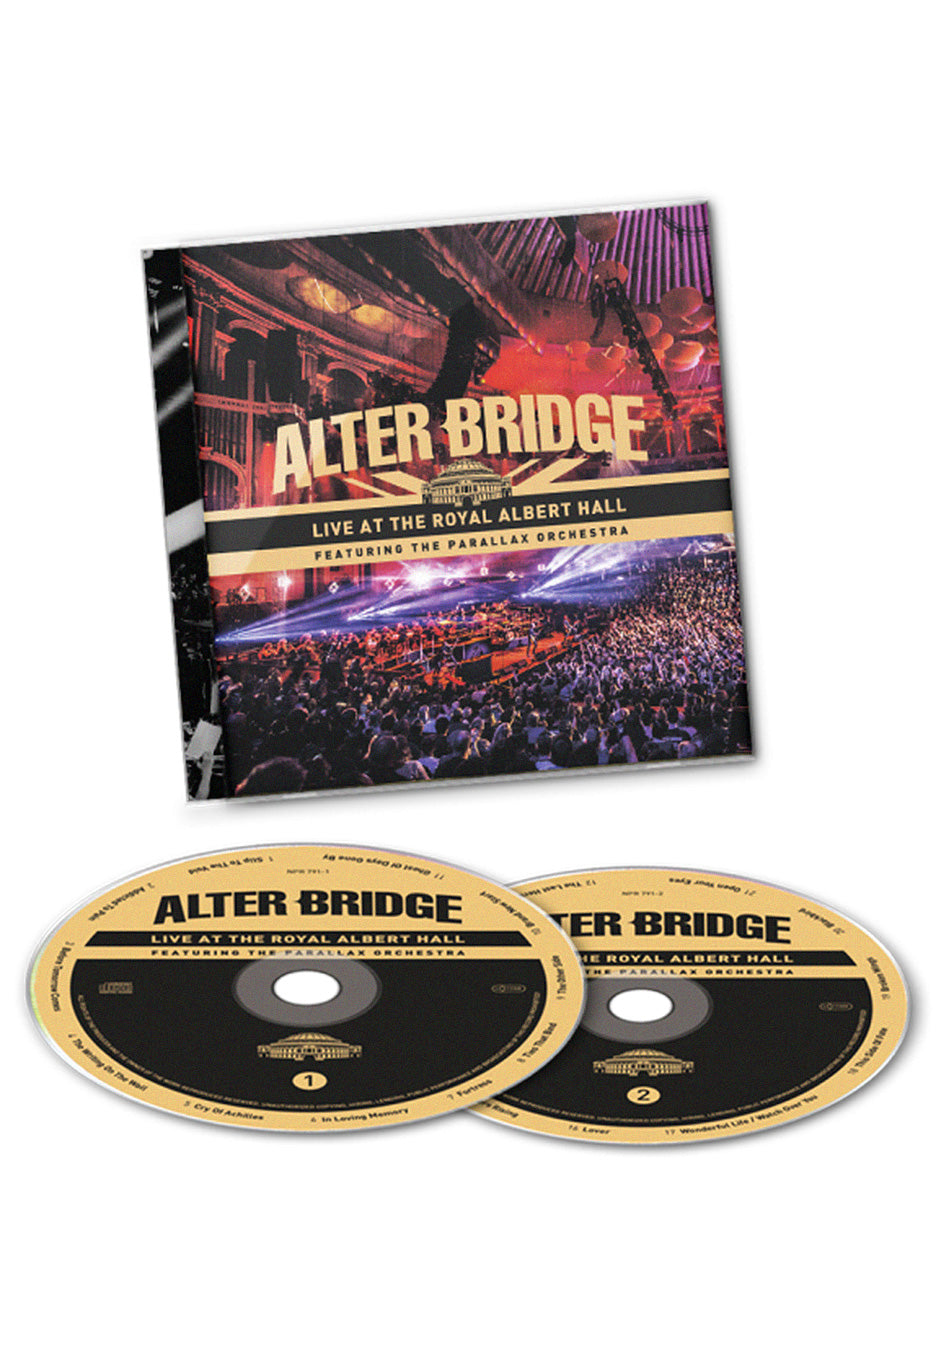 Alter Bridge - Live At The Royal Albert Hall Featuring The Parallay Orchestra - 2 CD